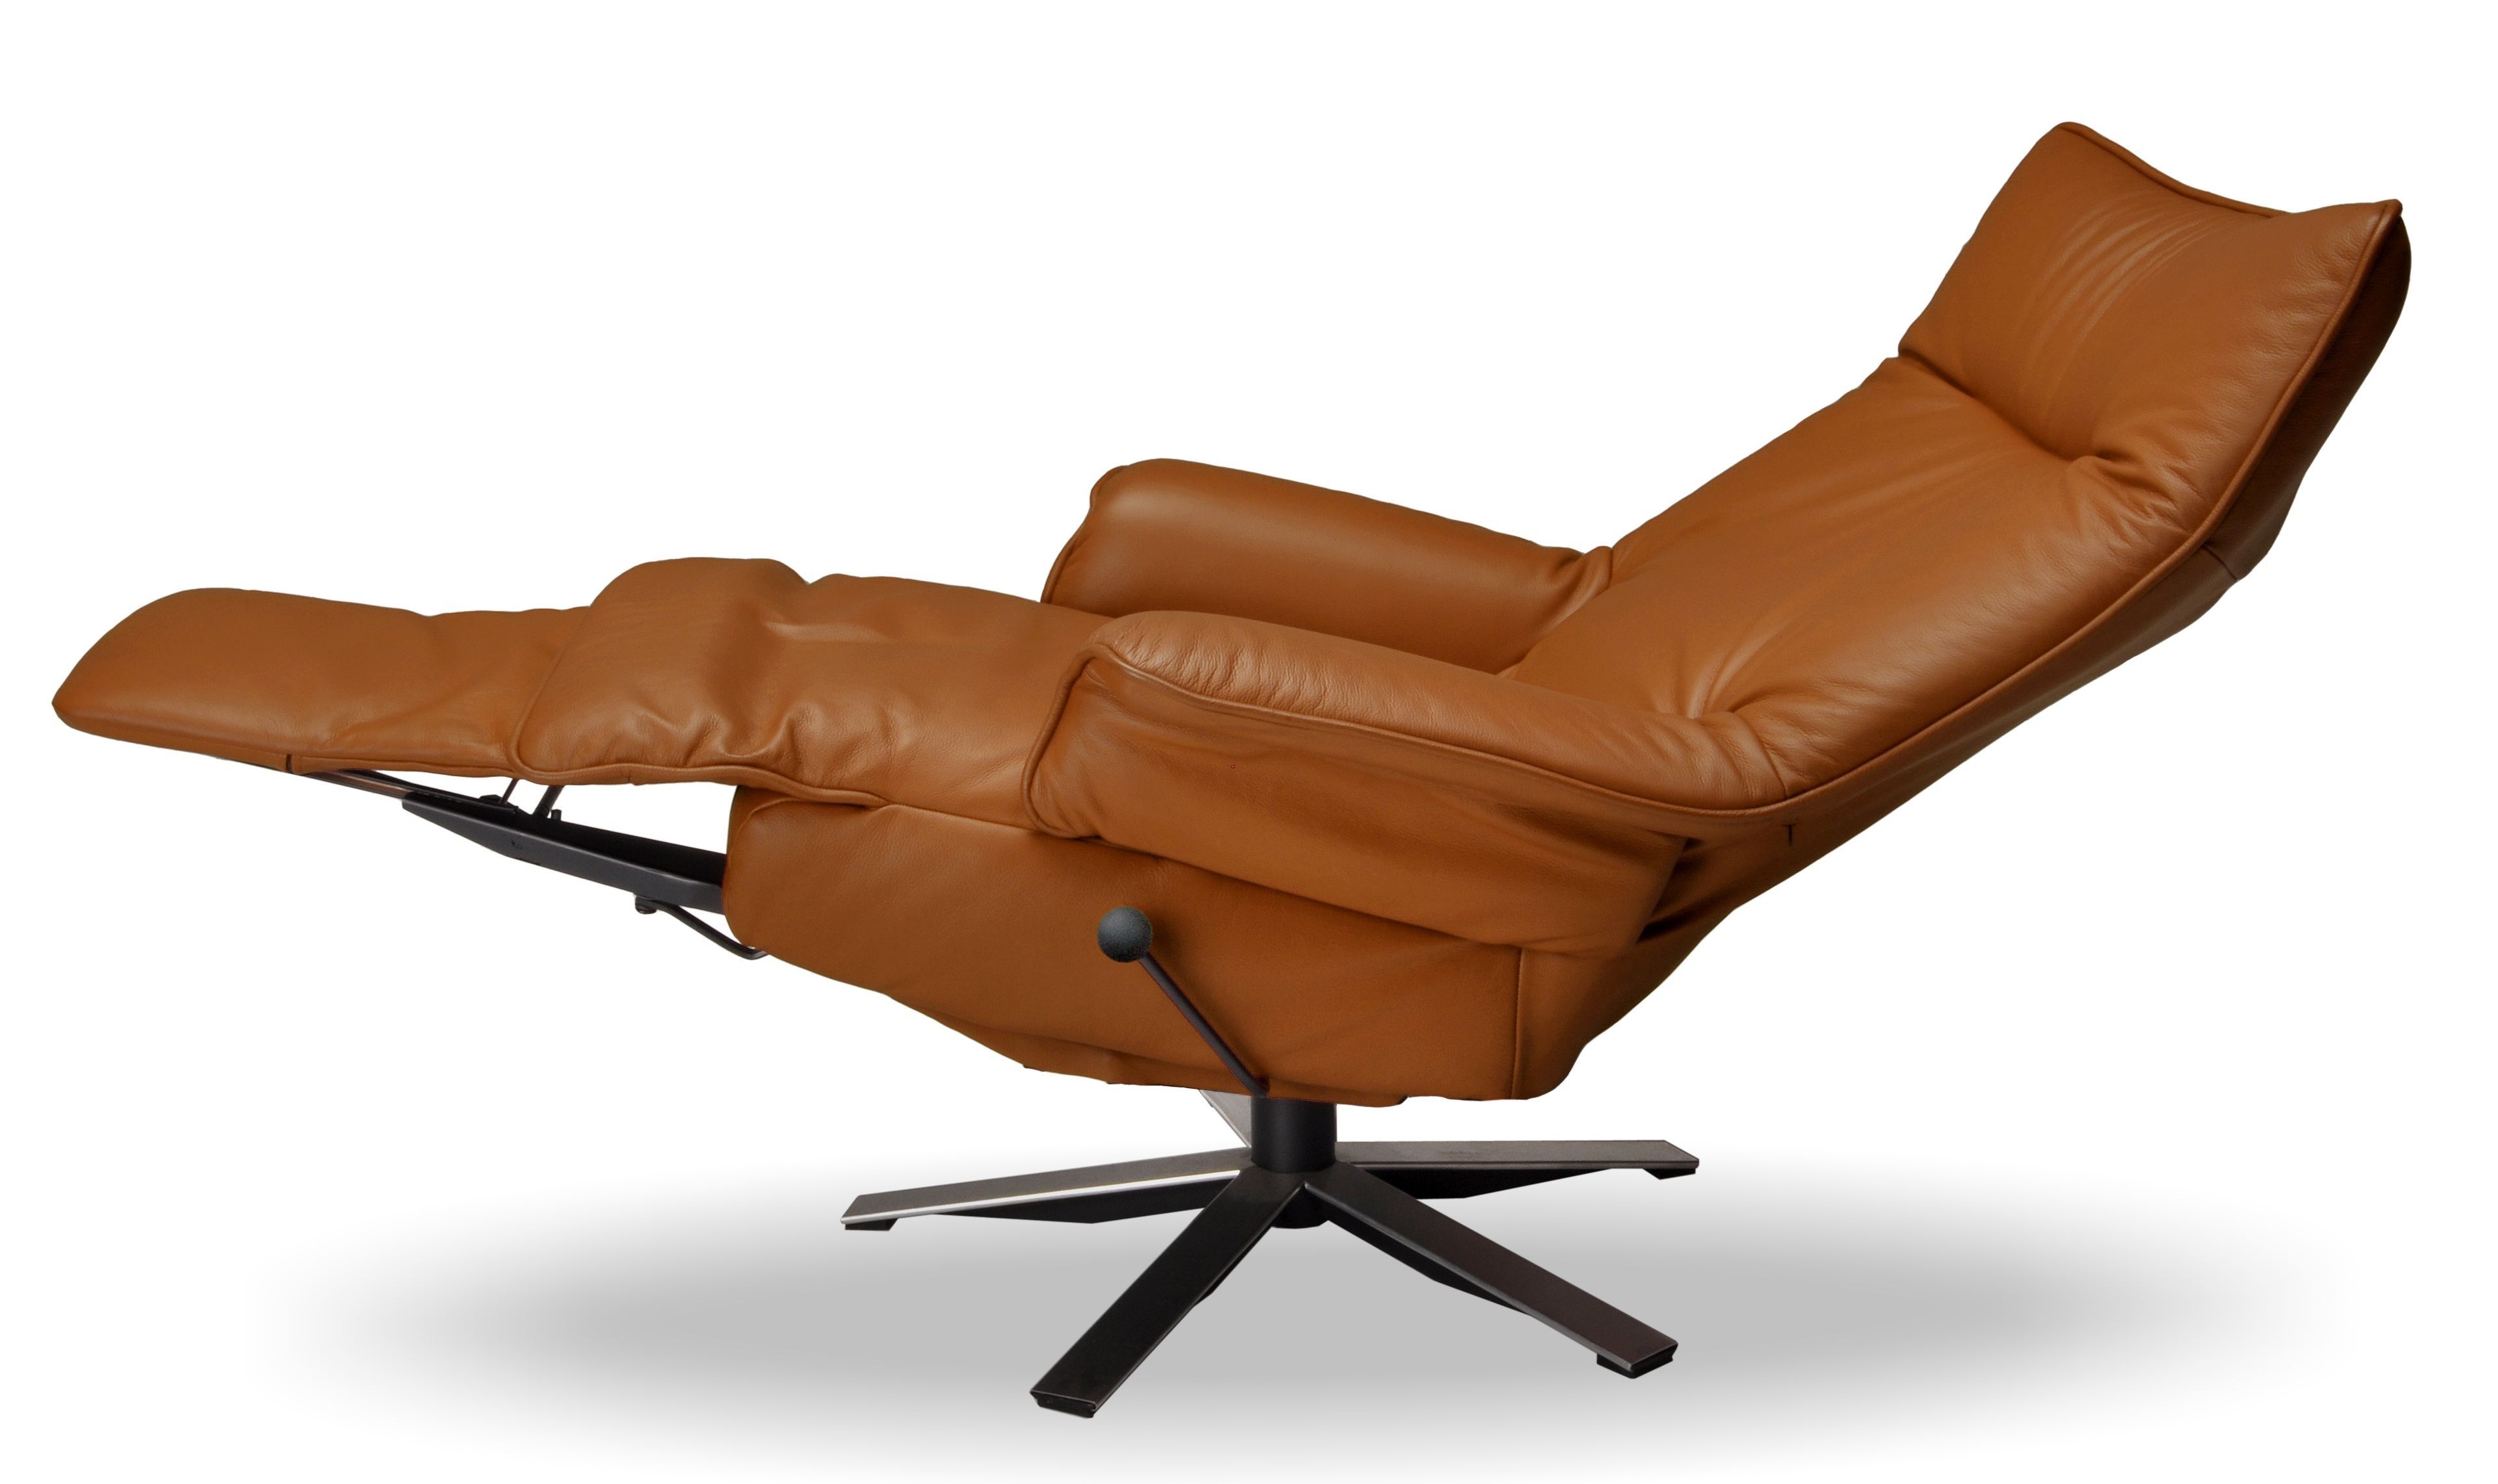 Recliner Materials and Design: How To Buy the Best Recliner